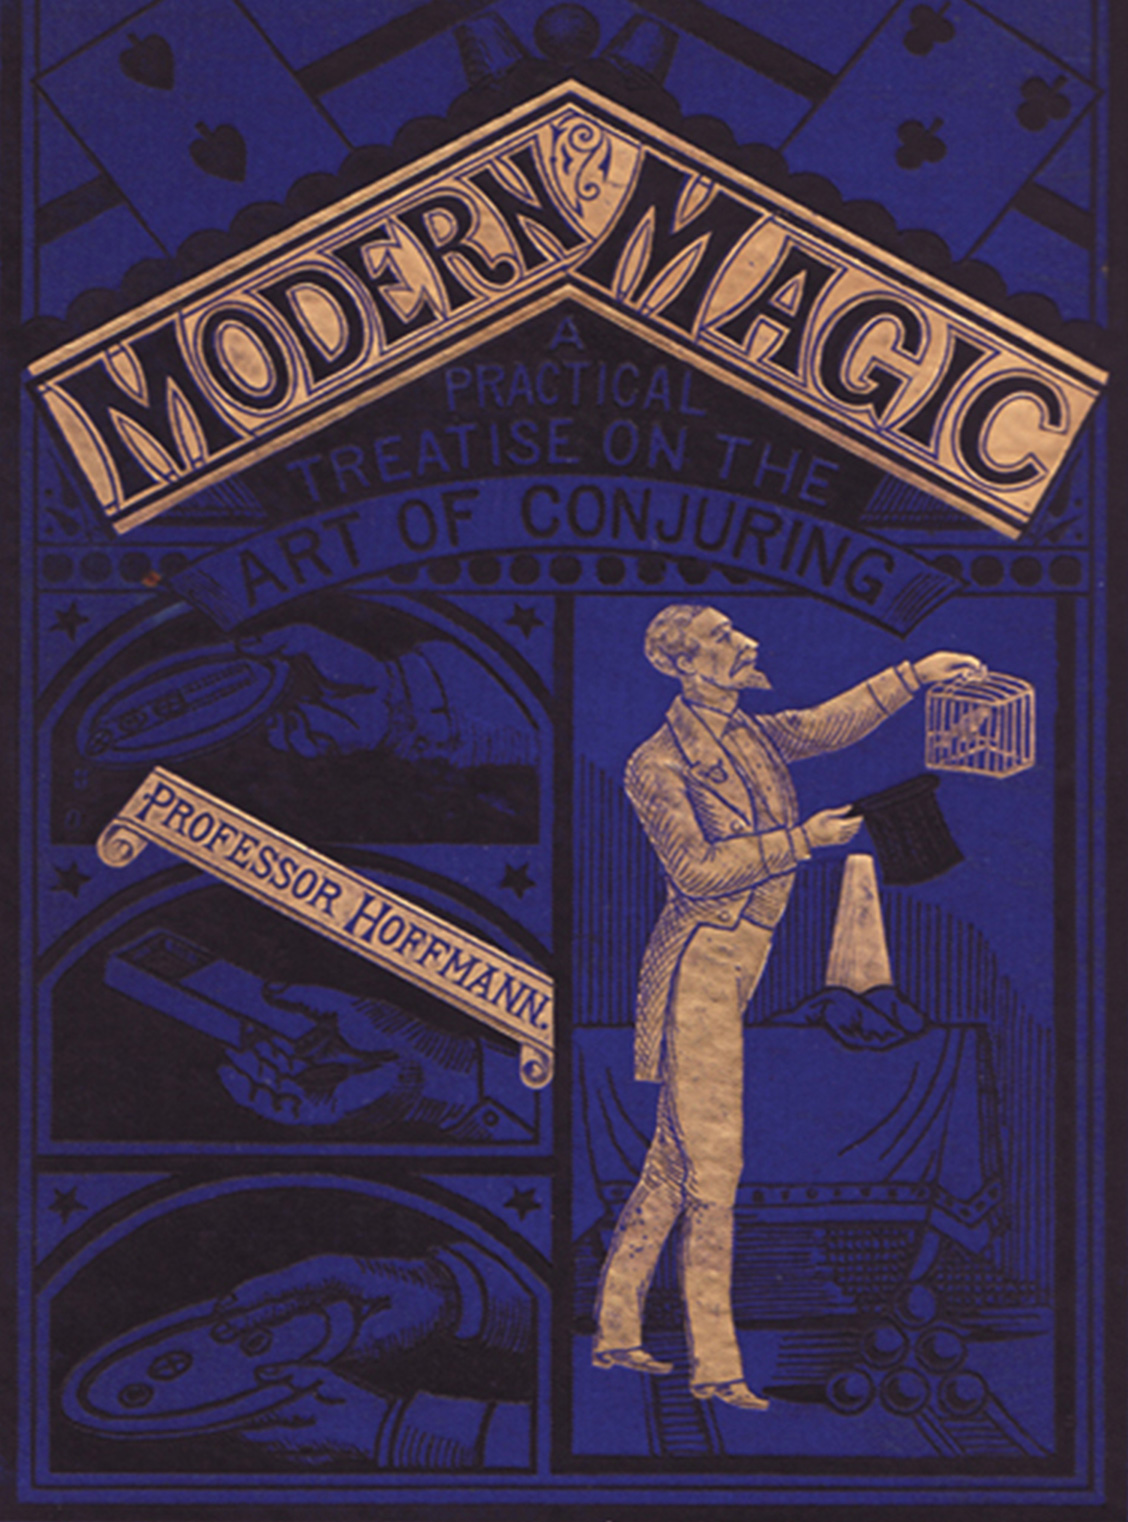 The cover of “Modern Magic” of eighteen seventy six by British magician Professor Hoffmann (Angelo Lewis). The publication of this popular how-to book caused an outcry among magicians, who believed it jeopardized their livelihood. Hoffmann gifted this copy to his wife, with the dedication, “To my Queen of Hearts from her own peculiar Wizard.”